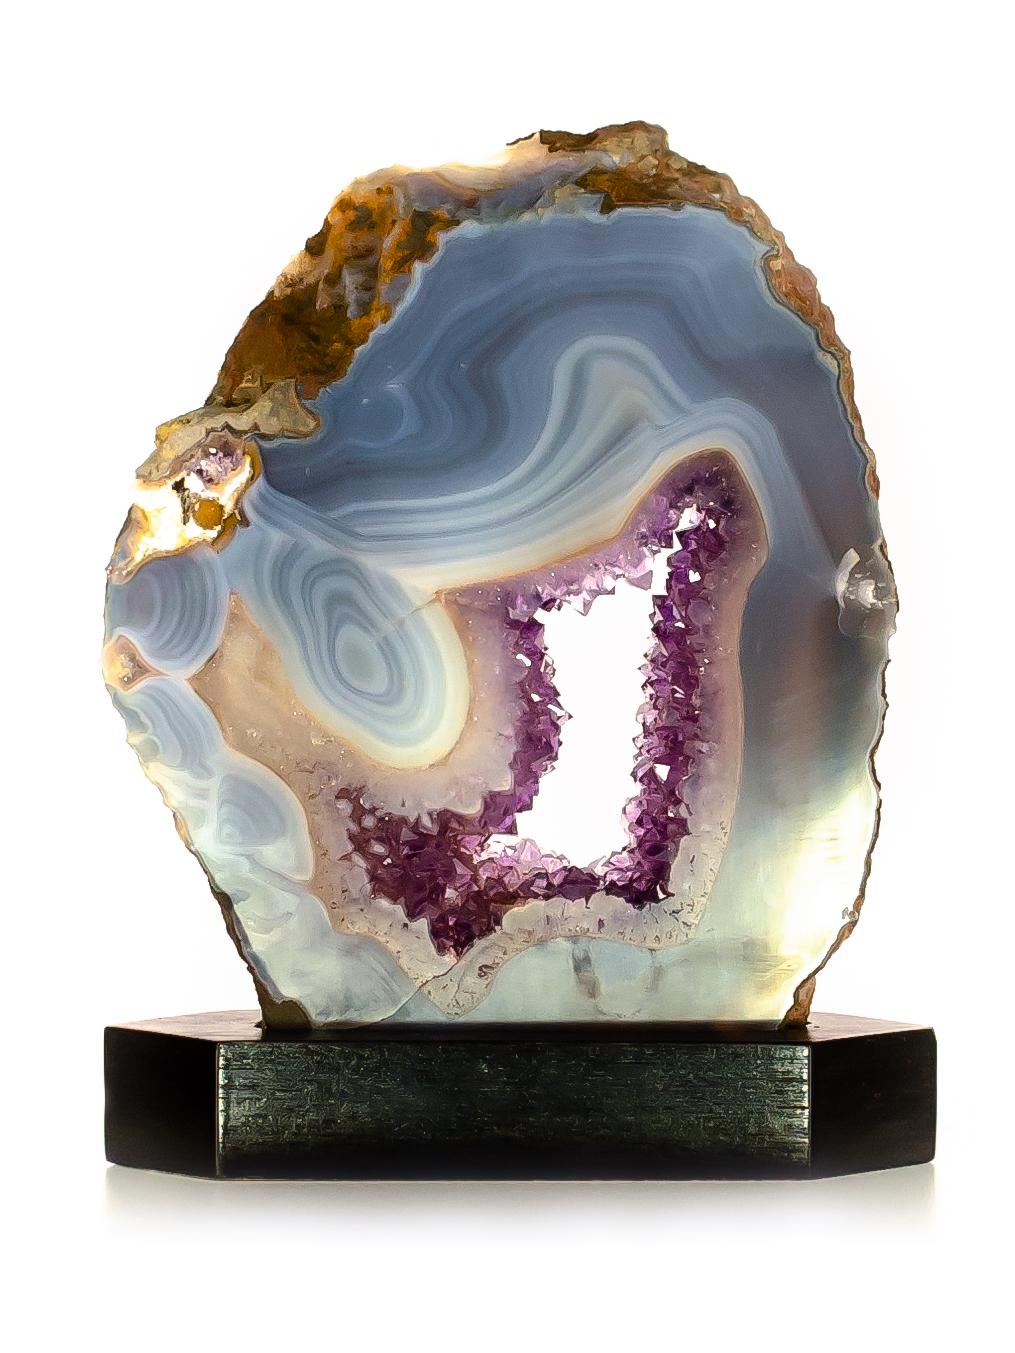 Uruguayan Amethyst Slice with Blue Polished Agate, Amethyst Crystals and White Quartz